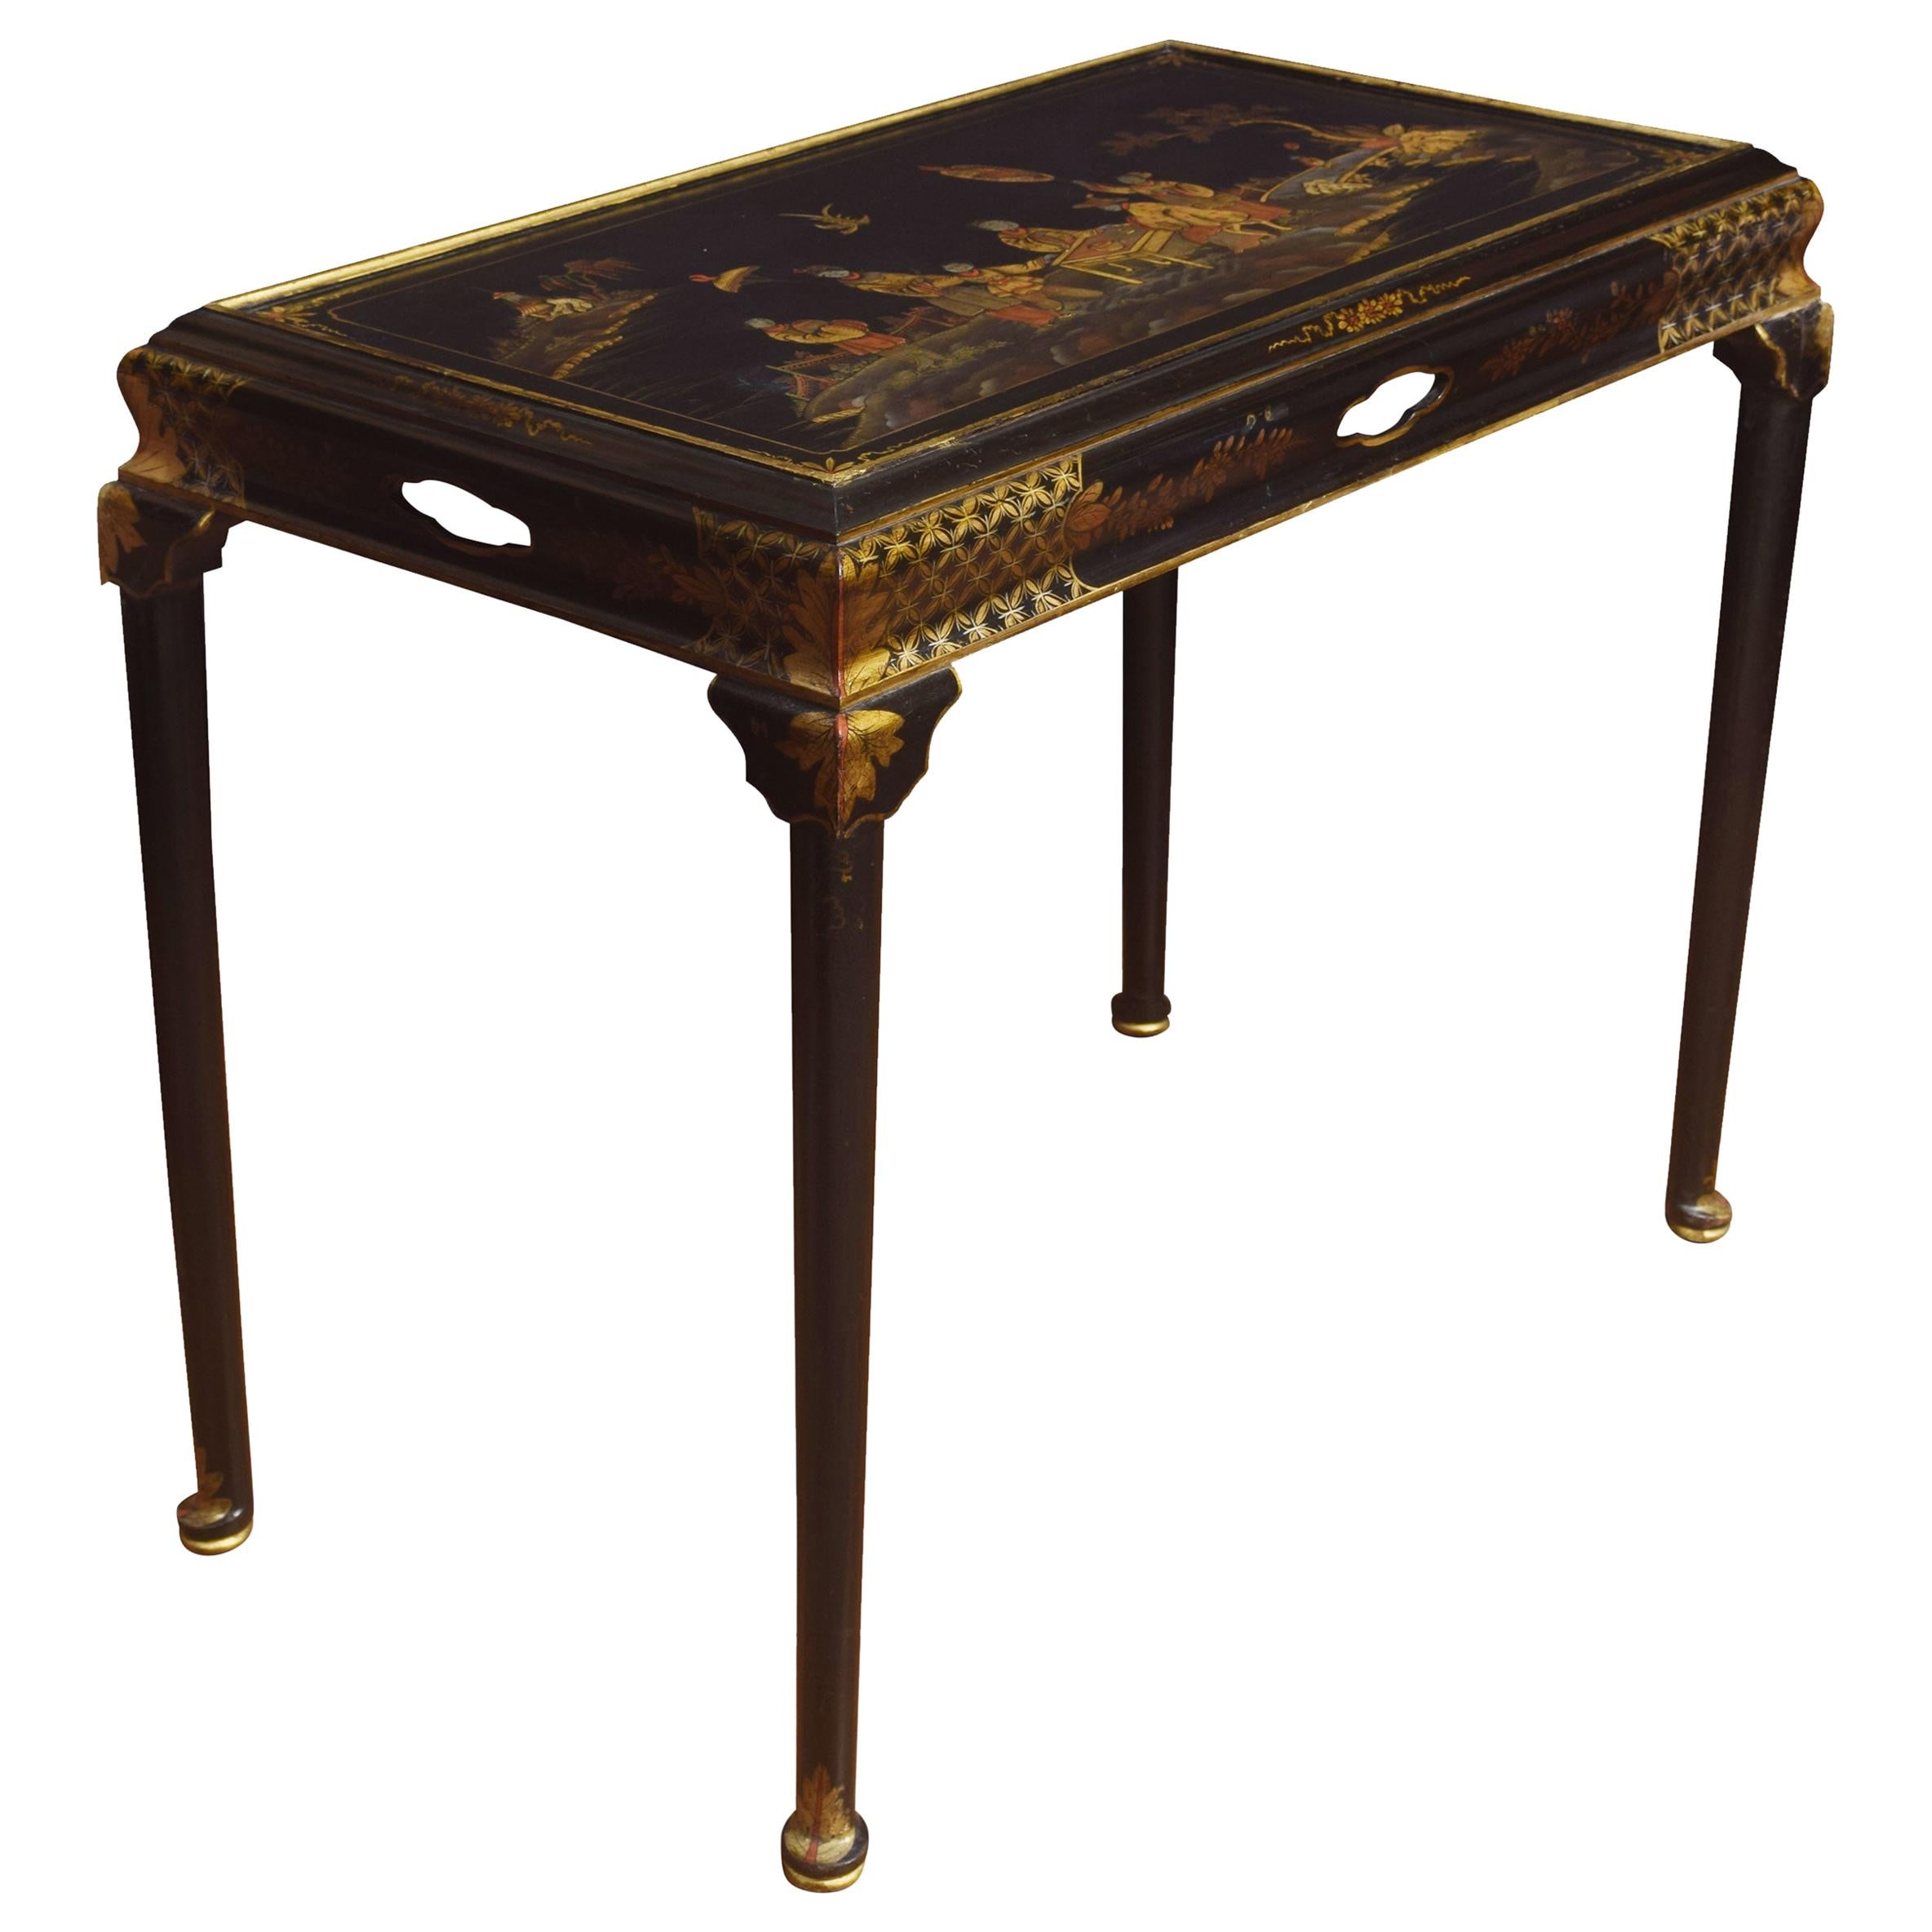 Chinoiserie Decorated Table